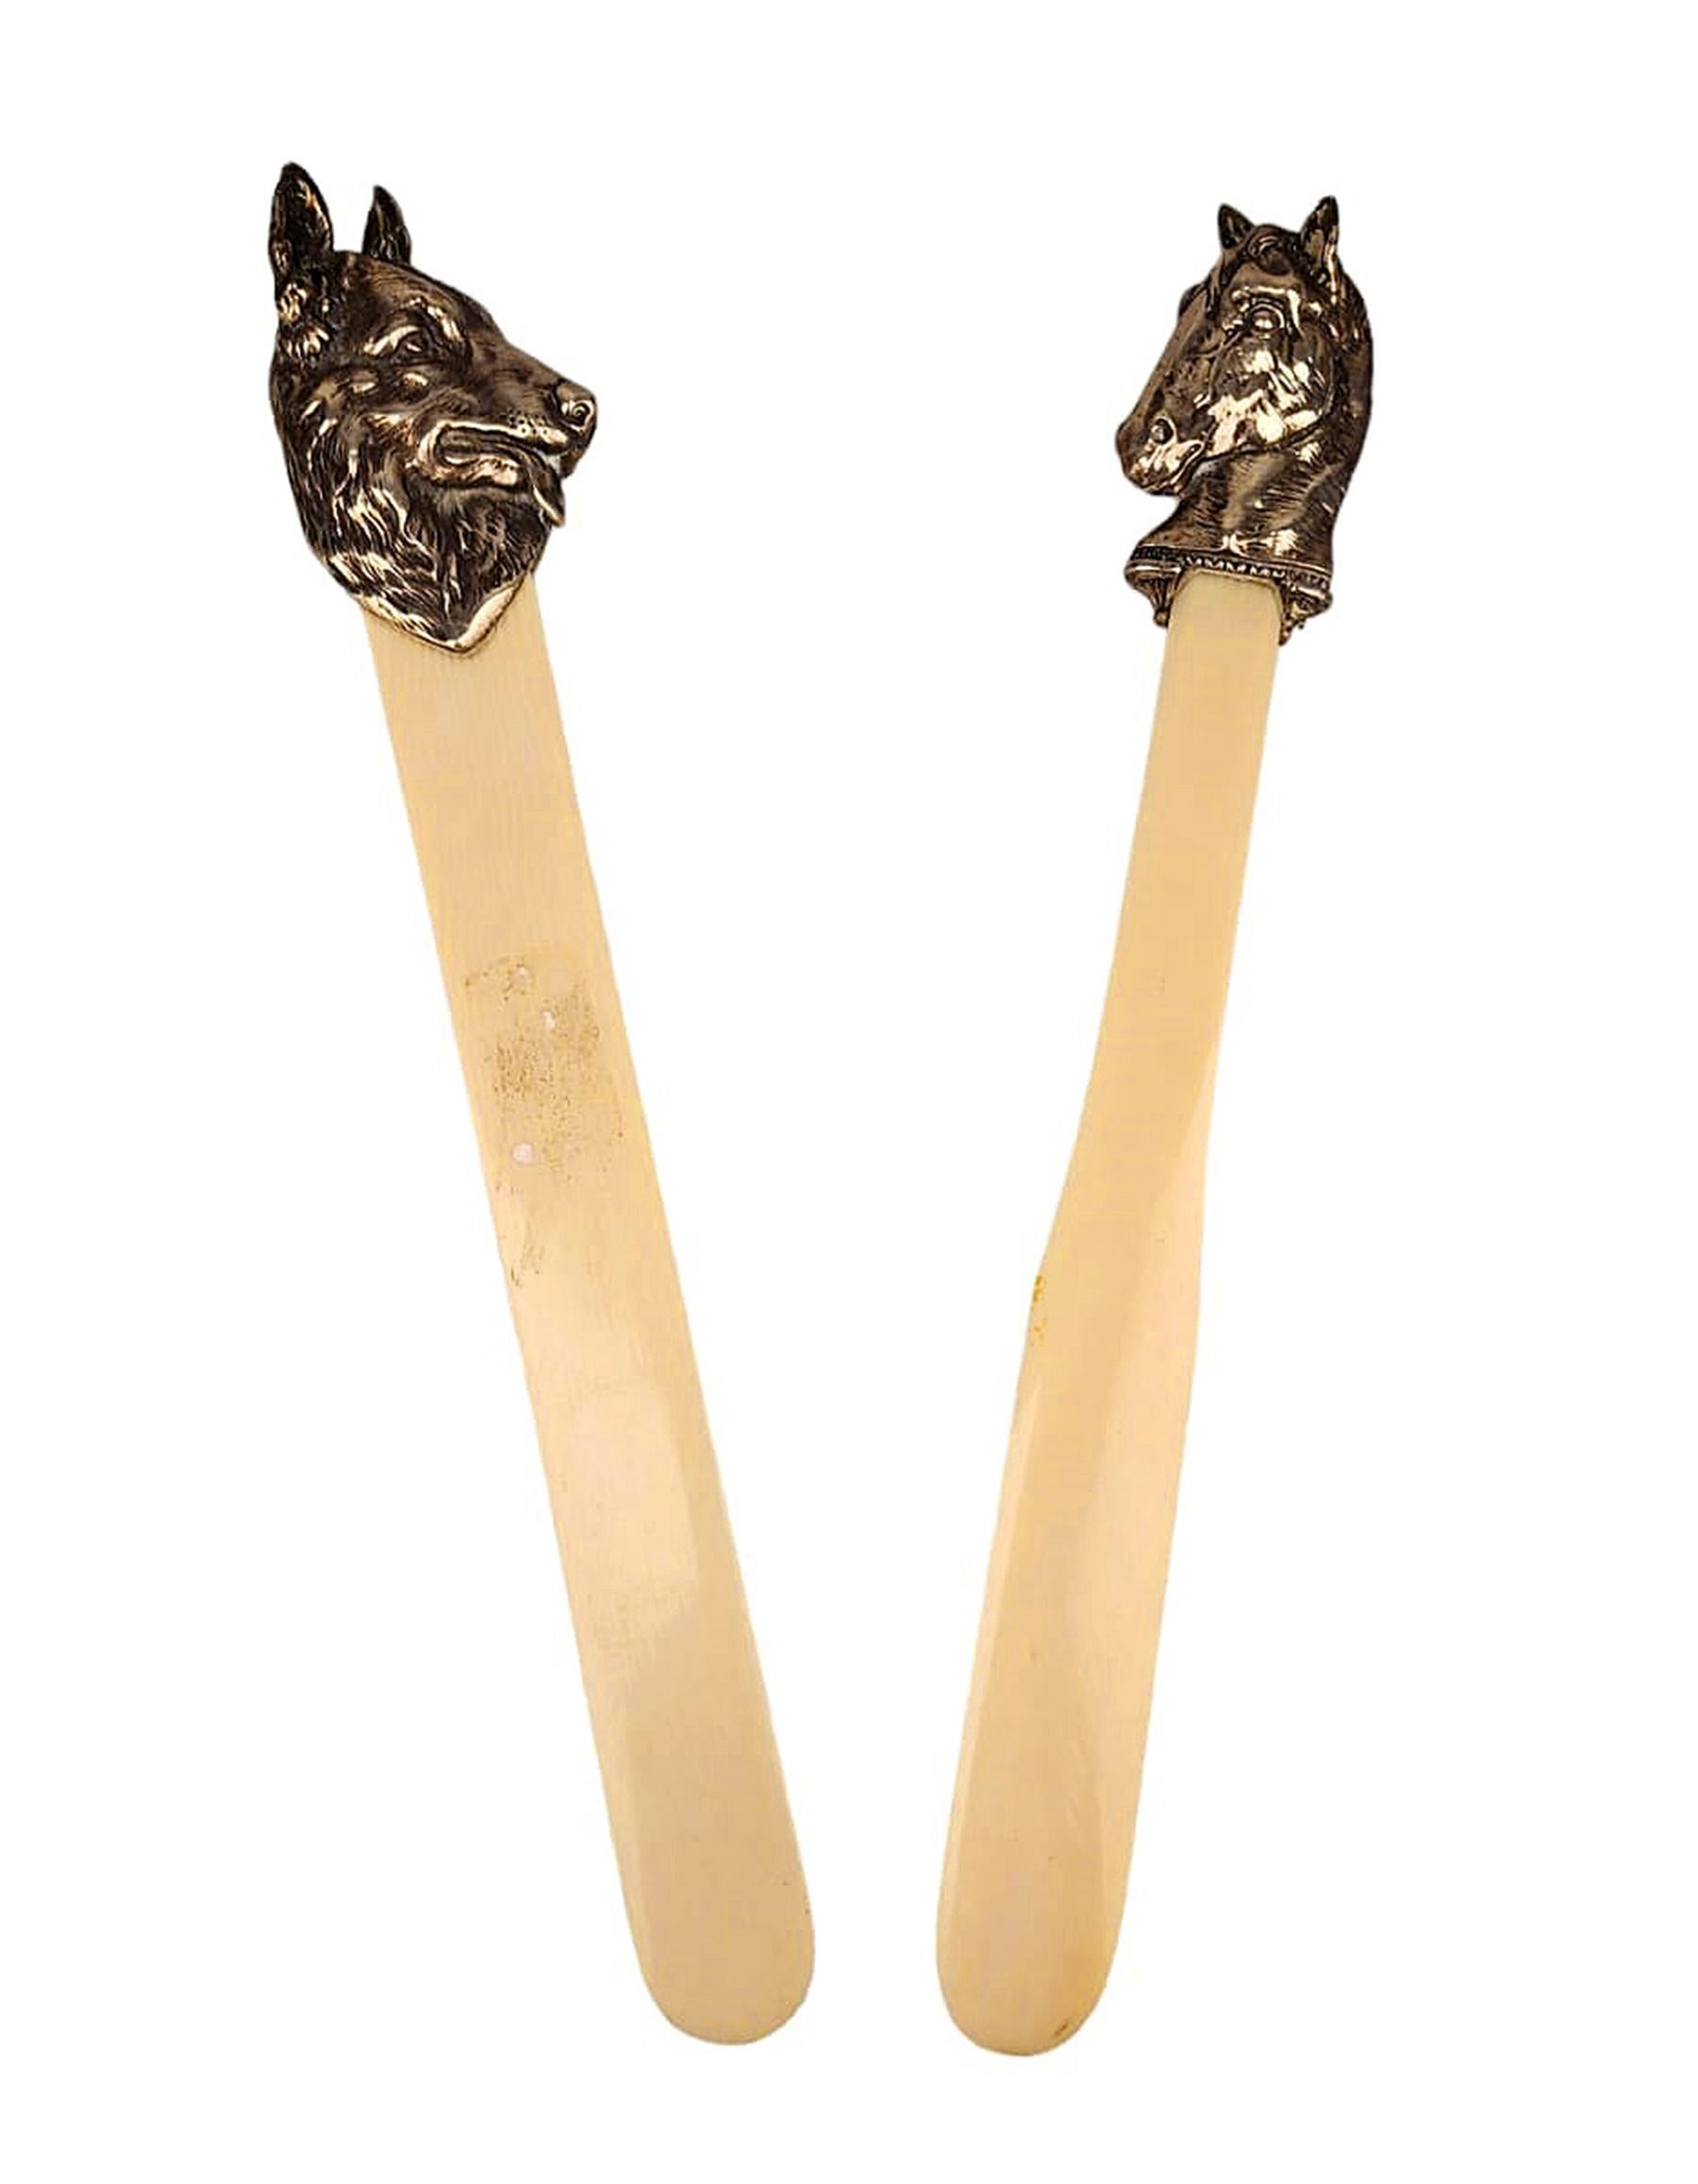 Pair of Late Victorian english ivory letter openers/bone folders with sterling silver horse and dog/wolf handles

By: unknown
Material: bone, silver, metal, sterling silver, ivory
Technique: molded, cast, metalwork, hand-crafted, carved,